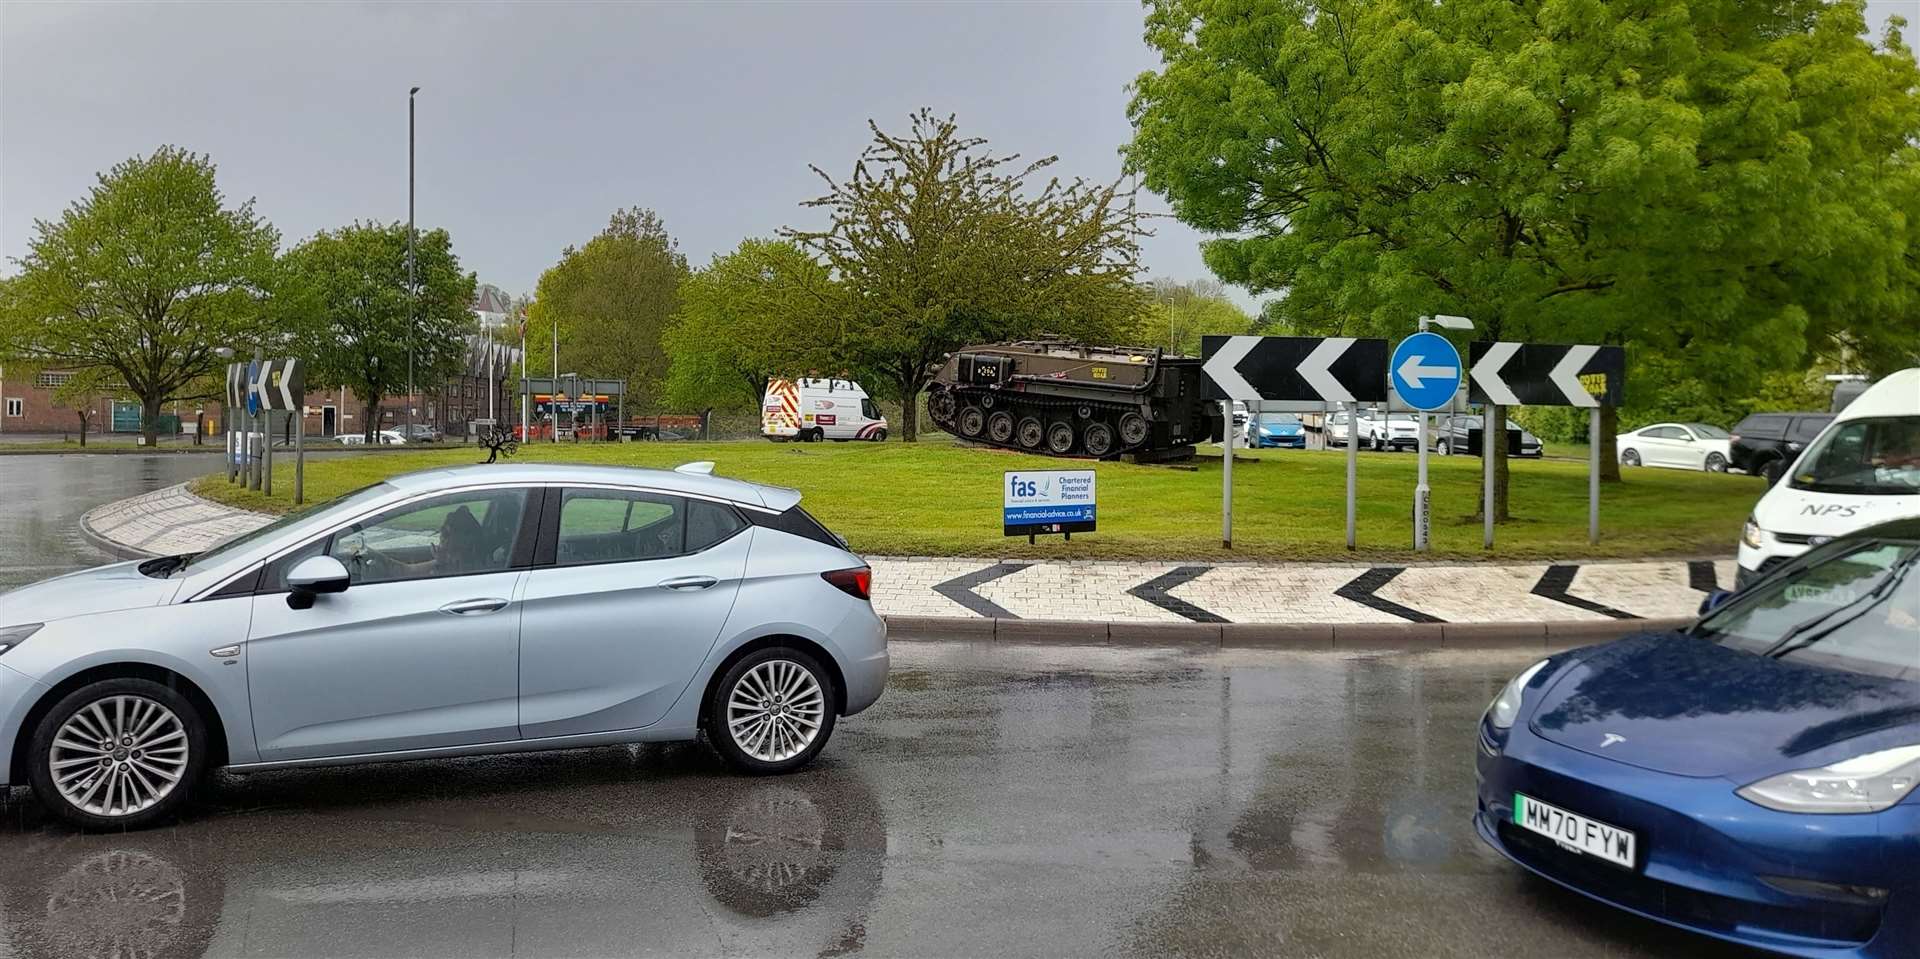 The five-armed 'tank roundabout' is one of the busiest junctions in Ashford